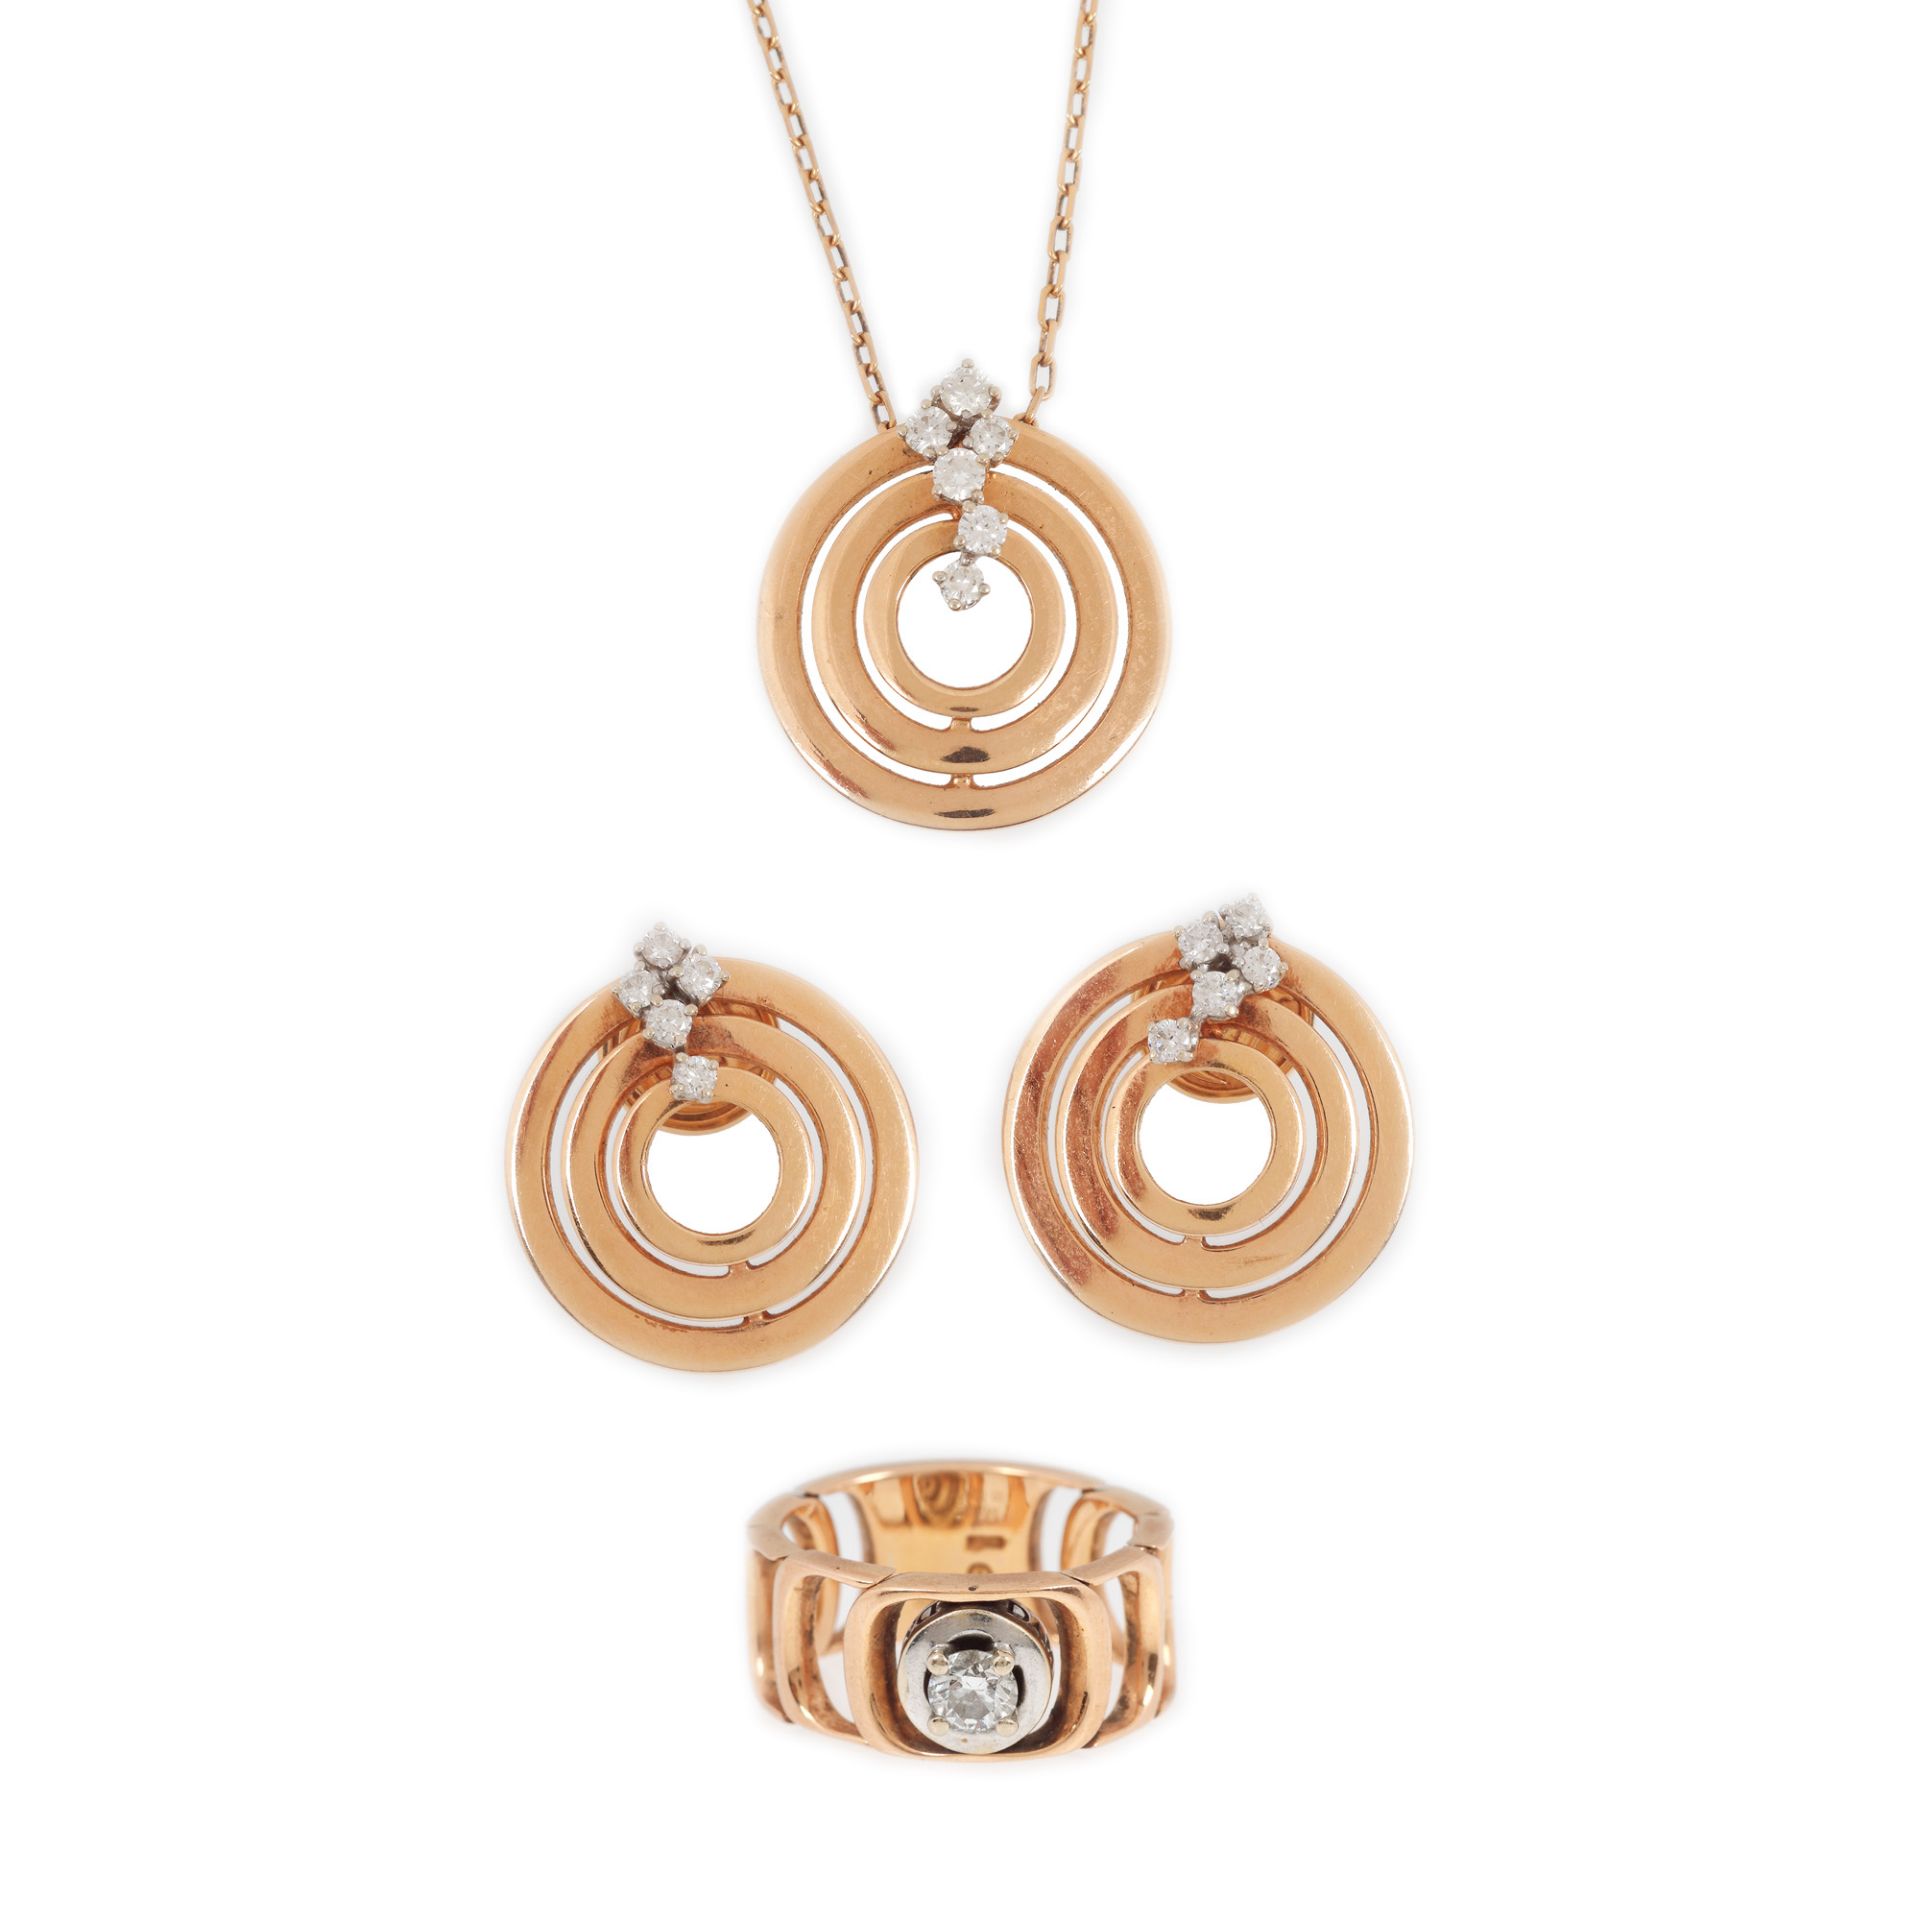 Damiani set, white and rose gold, decorated with diamonds